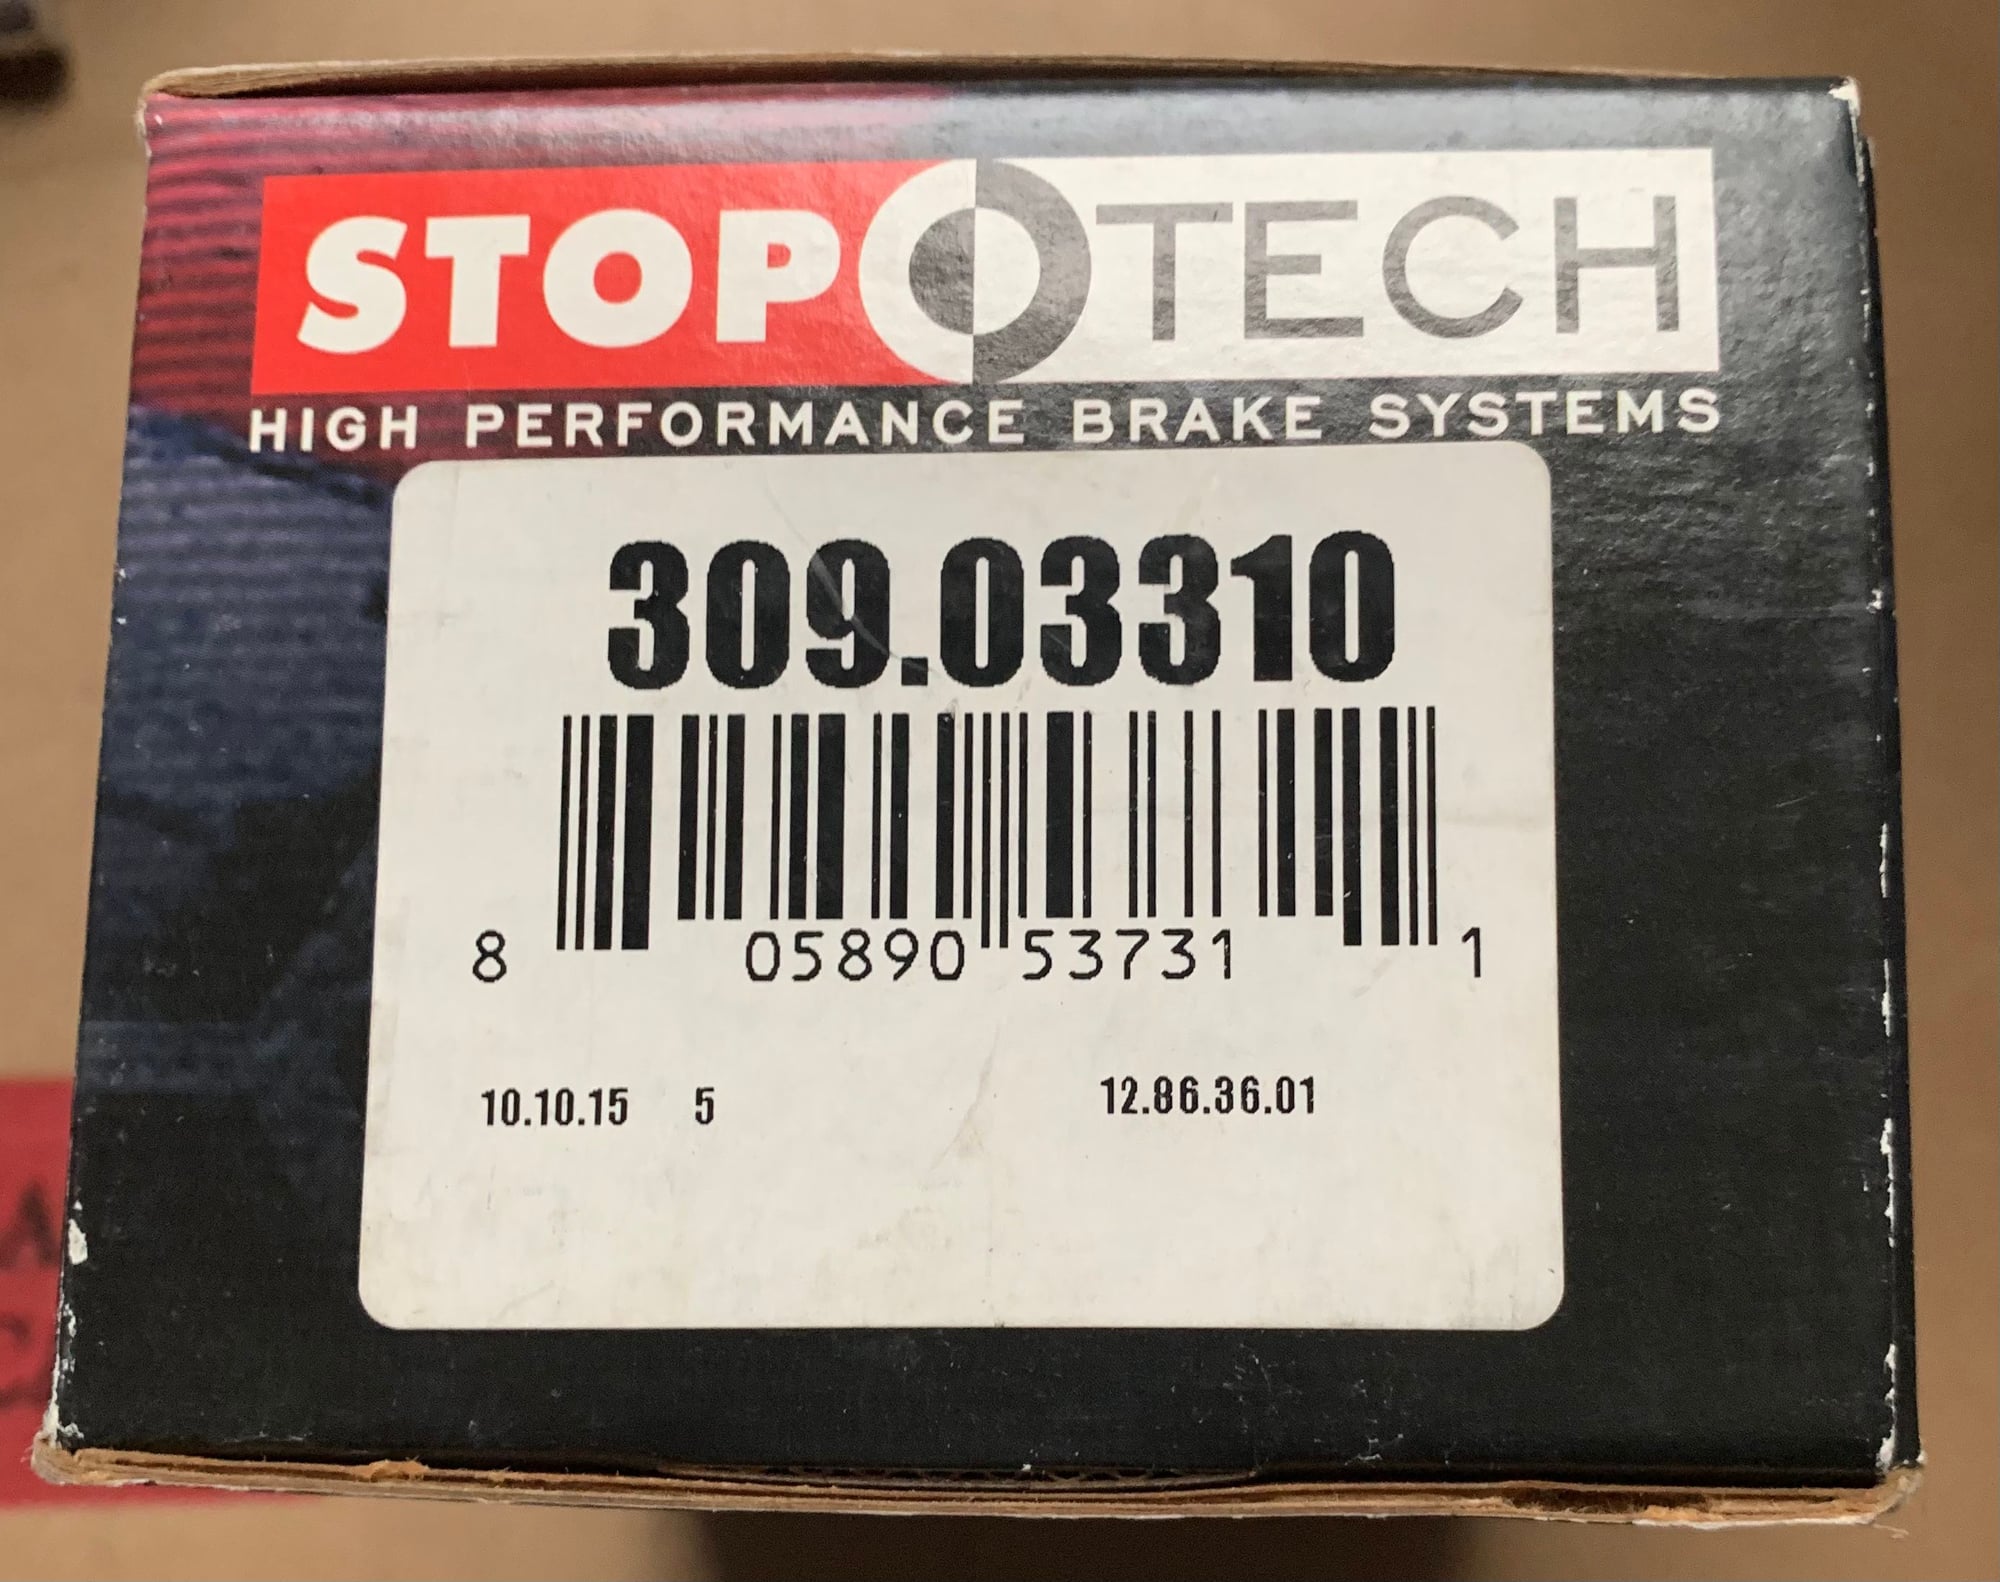 Brakes - New Stop Tech street performance front brake pads - New - 1986 to 1995 Mazda RX-7 - Providence, RI 02862, United States